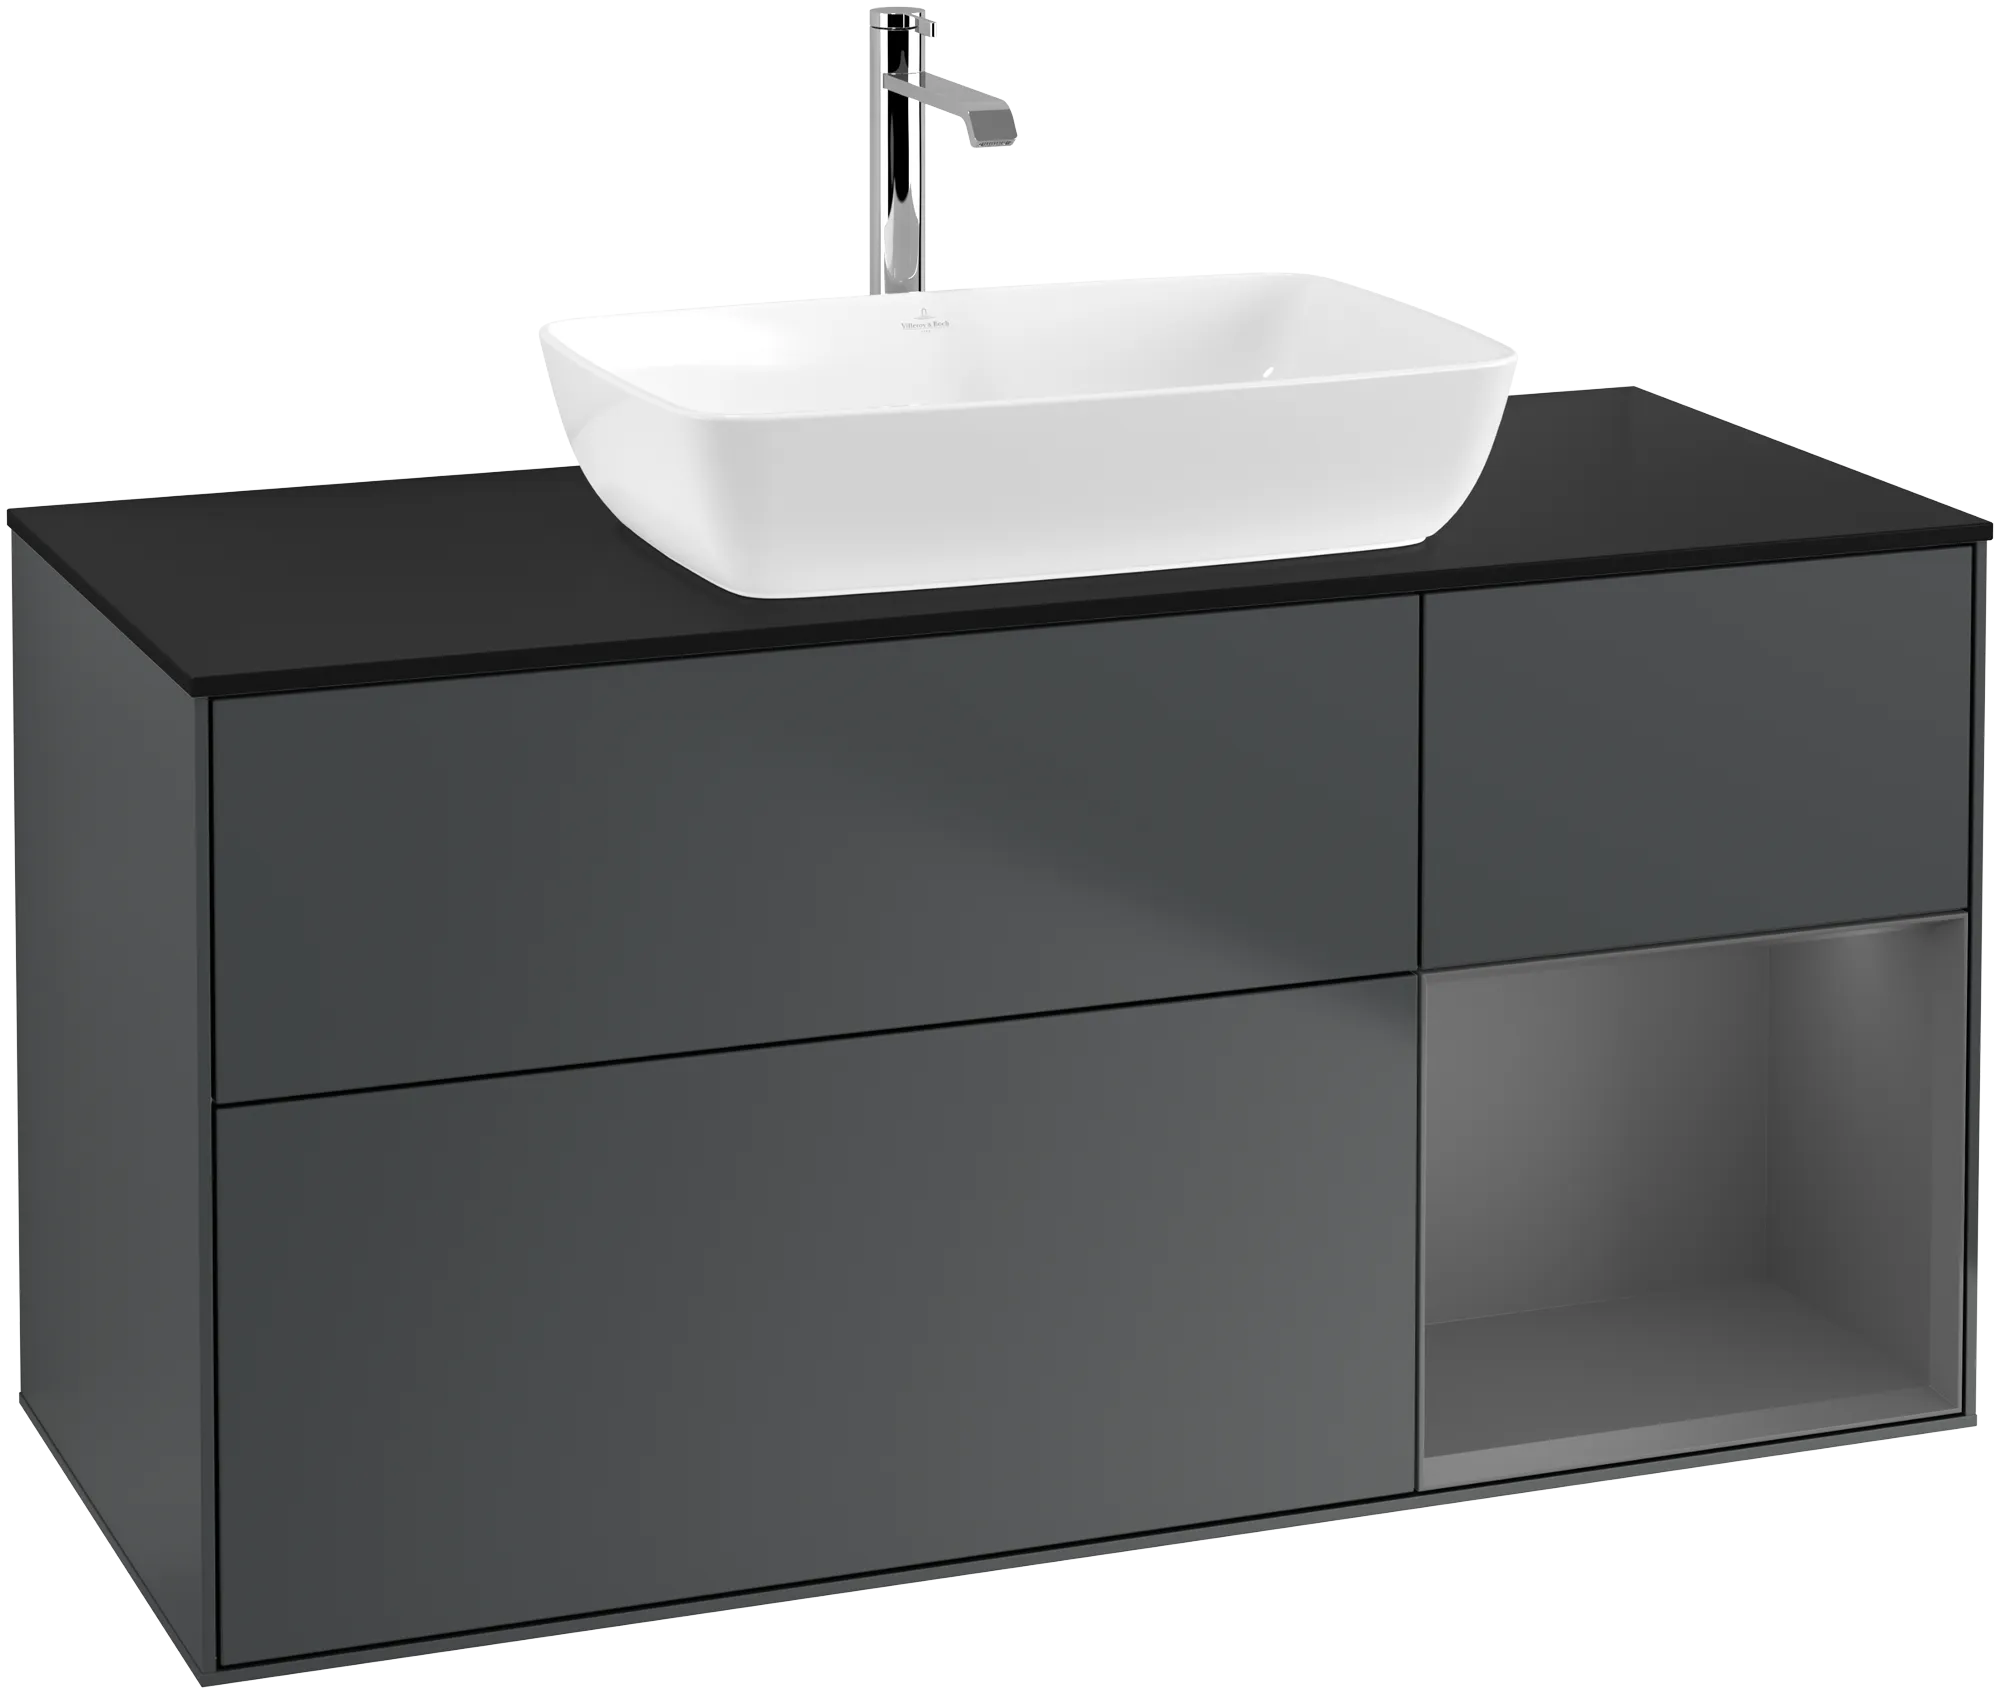 Picture of VILLEROY BOCH Finion Vanity unit, with lighting, 3 pull-out compartments, 1200 x 603 x 501 mm, Midnight Blue Matt Lacquer / Anthracite Matt Lacquer / Glass Black Matt #G832GKHG